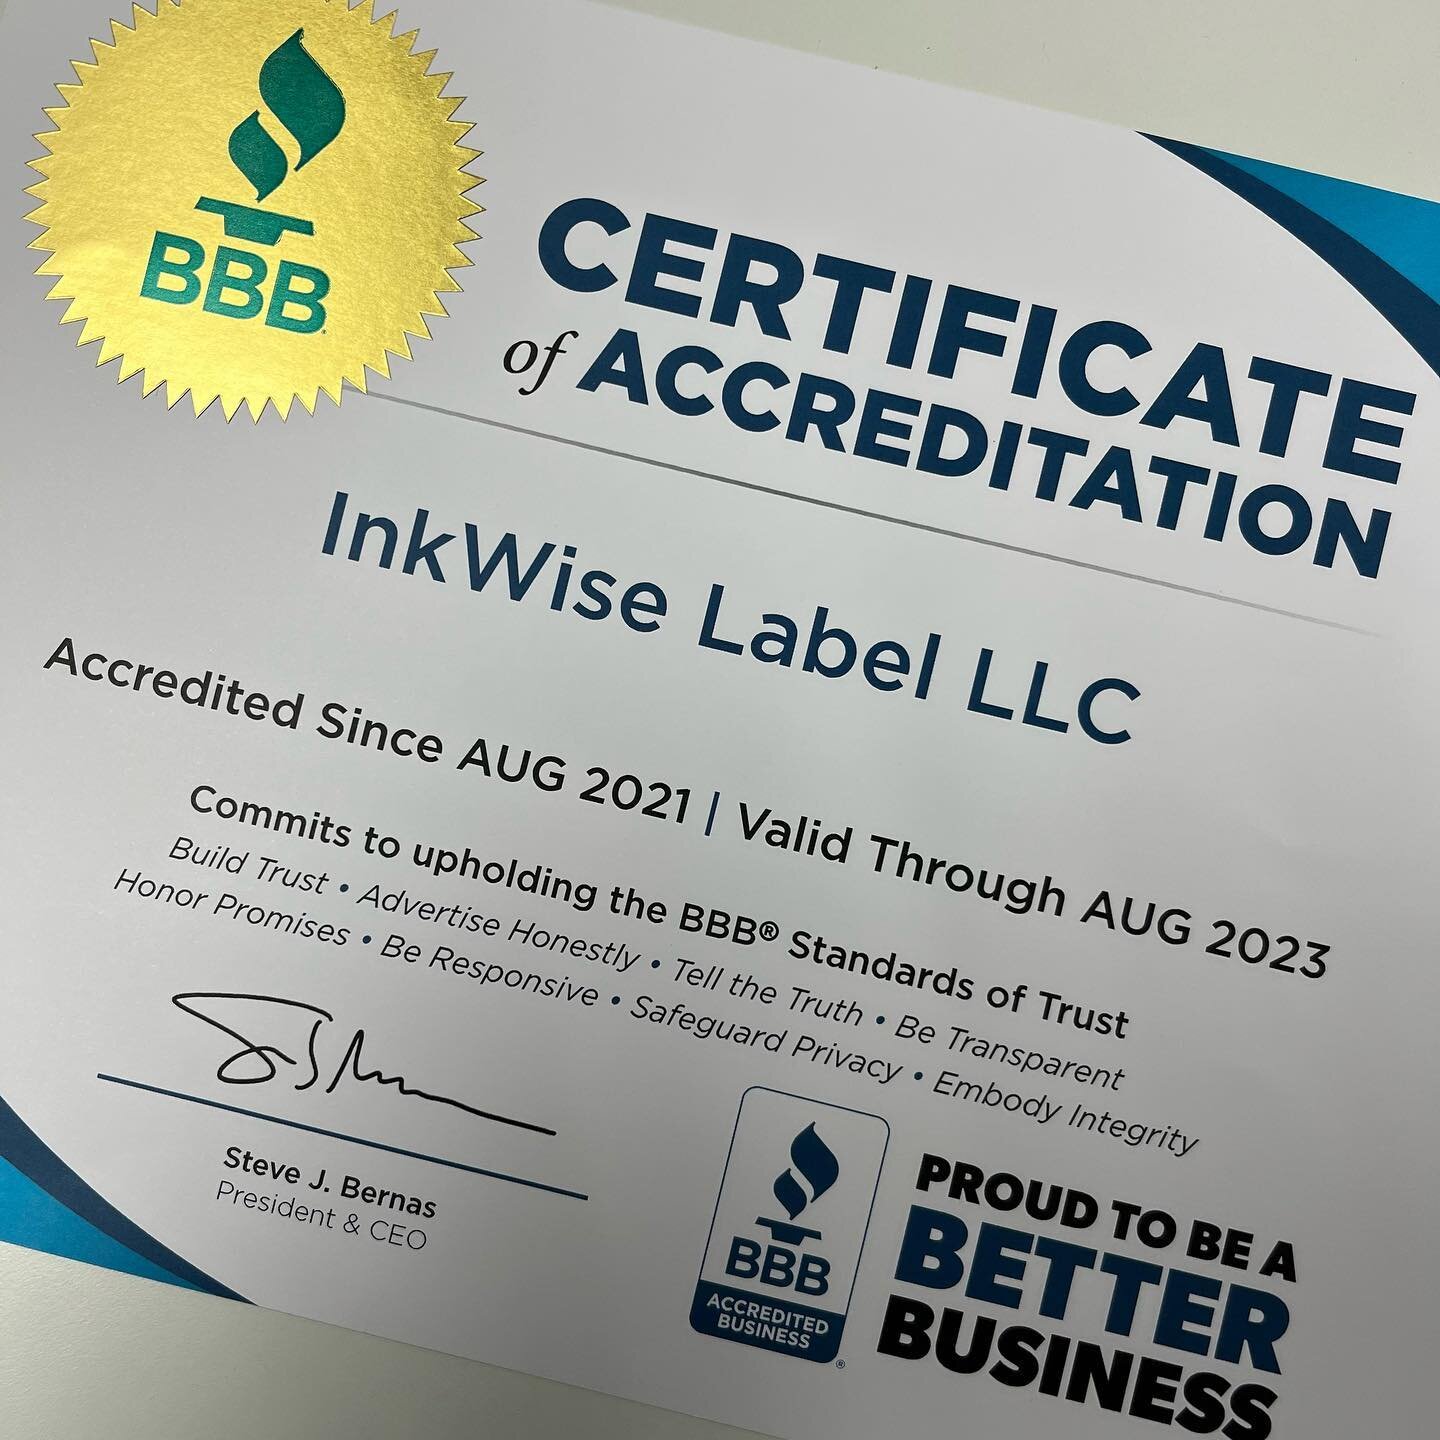 We believe Better Business isn&rsquo;t just a certification, but a daily practice. That&rsquo;s how we&rsquo;ve maintain an A+ rating from the start.
.
.
#tryingharder #doingwhatsright #helpingbusinessesgrow #entrepreneur #smallbusiness #greatlabels 